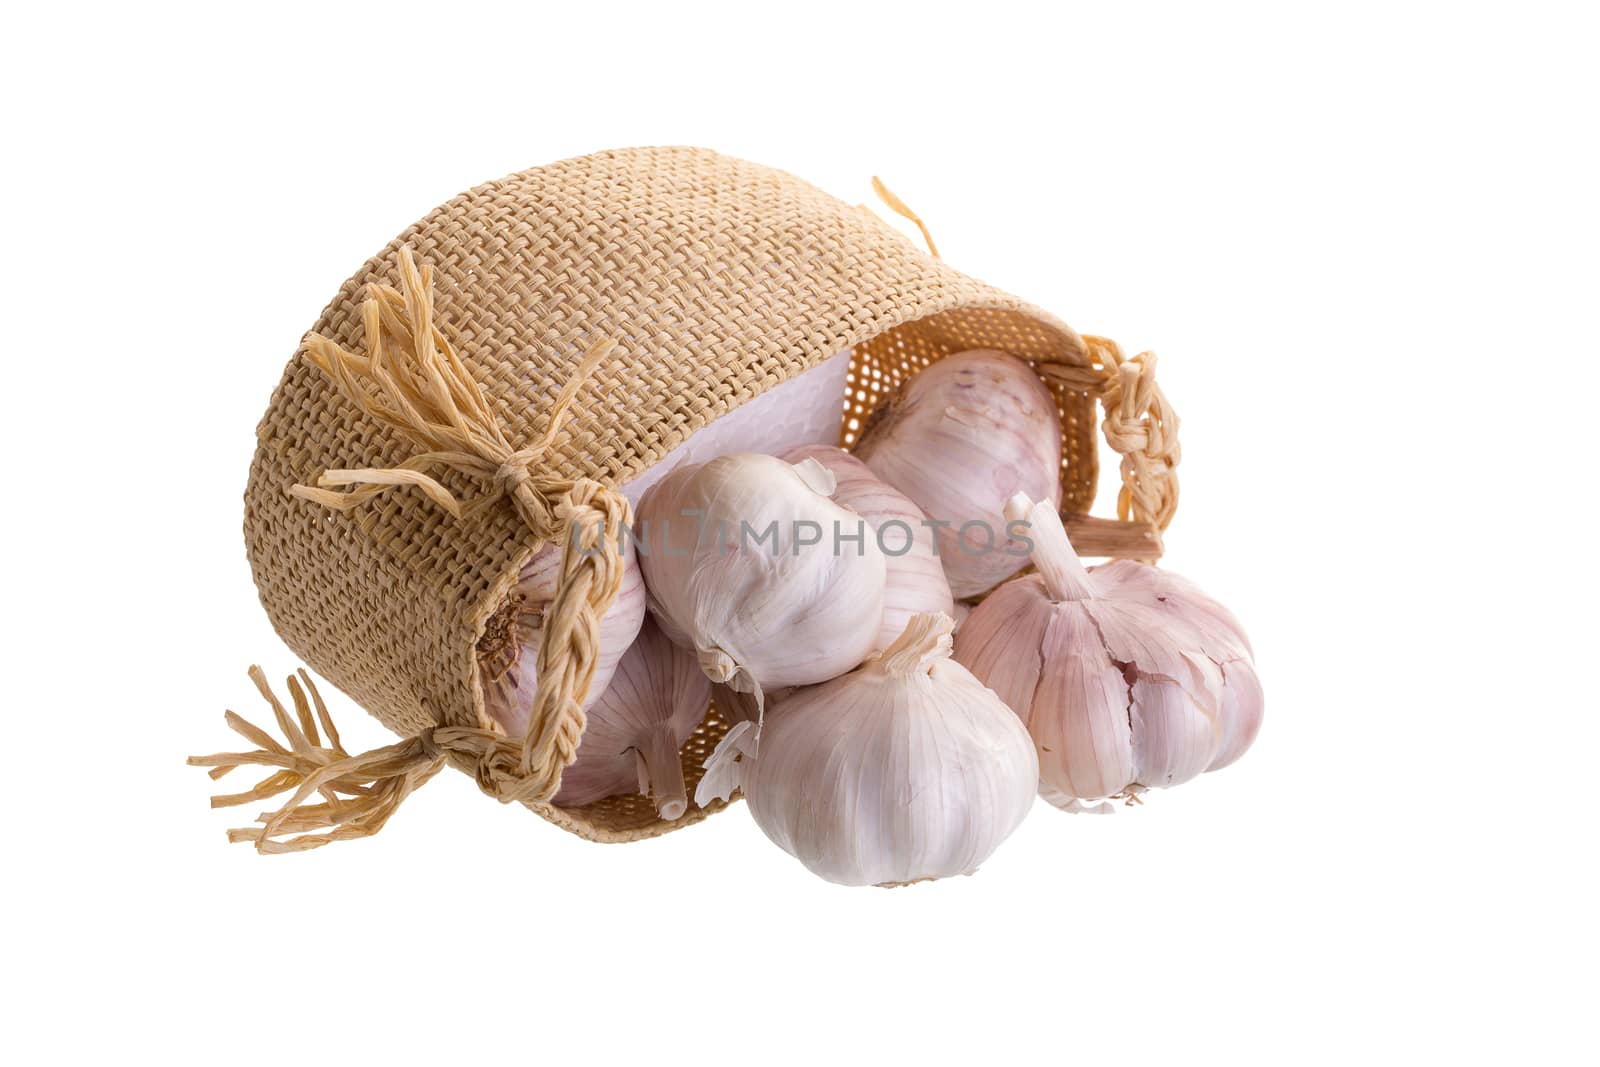 Garlic In the basket isolated on a white background by kaiskynet